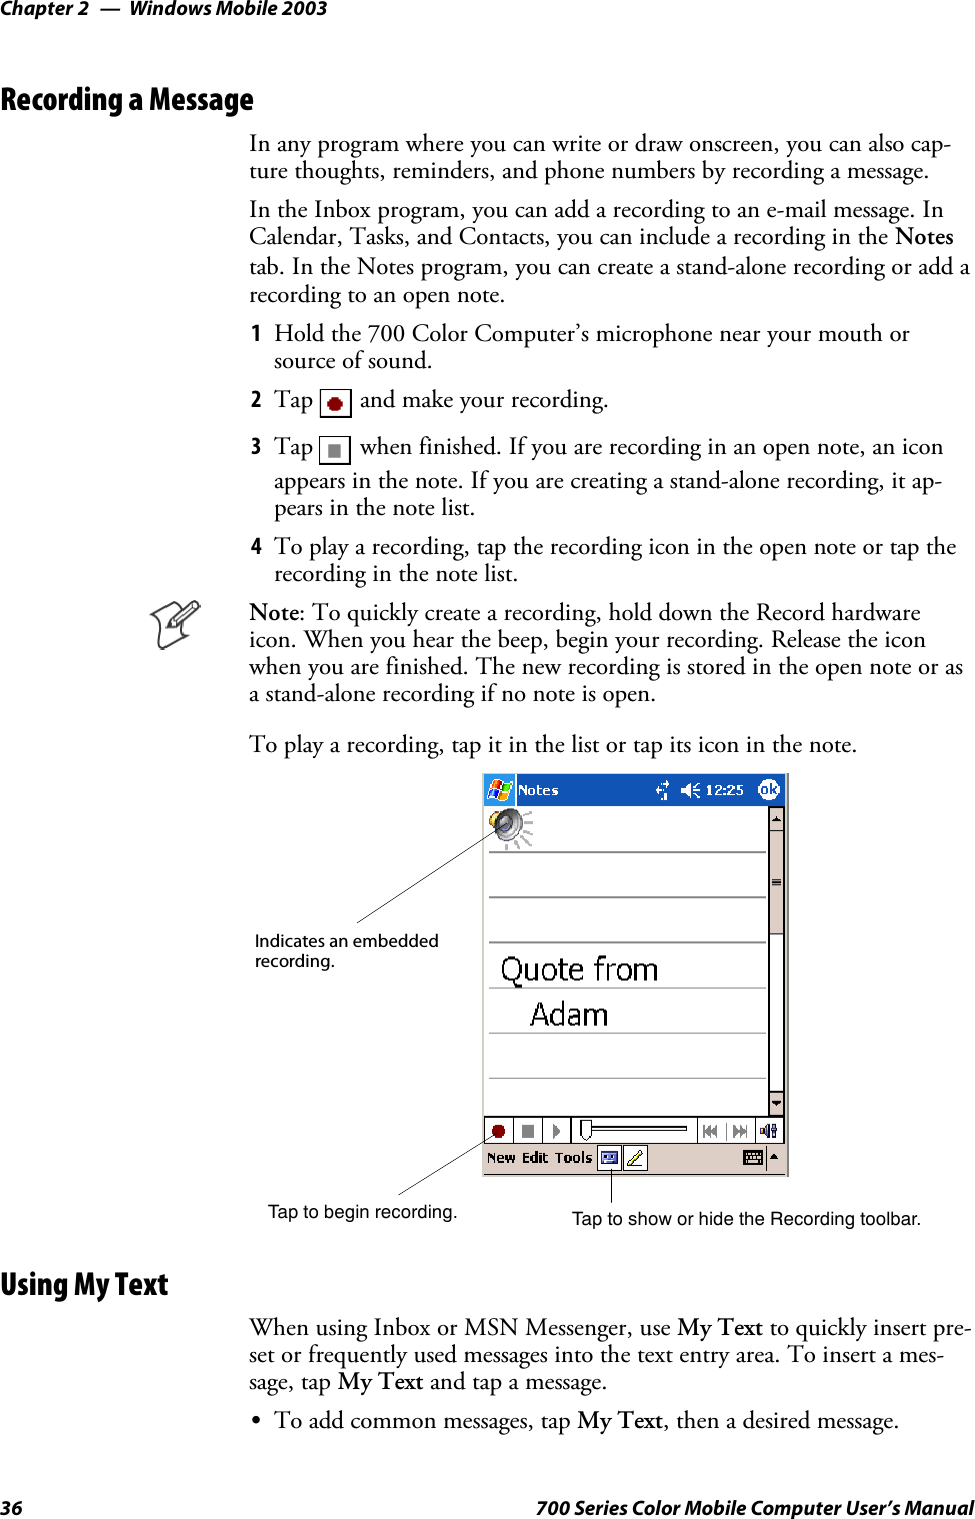 Windows Mobile 2003Chapter —236 700 Series Color Mobile Computer User’s ManualRecording a MessageIn any program where you can write or draw onscreen, you can also cap-ture thoughts, reminders, and phone numbers by recording a message.In the Inbox program, you can add a recording to an e-mail message. InCalendar, Tasks, and Contacts, you can include a recording in the Notestab. In the Notes program, you can create a stand-alone recording or add arecording to an open note.1Hold the 700 Color Computer’s microphone near your mouth orsource of sound.2Tap and make your recording.3Tap when finished. If you are recording in an open note, an iconappears in the note. If you are creating a stand-alone recording, it ap-pears in the note list.4To play a recording, tap the recording icon in the open note or tap therecording in the note list.Note: To quickly create a recording, hold down the Record hardwareicon. When you hear the beep, begin your recording. Release the iconwhen you are finished. The new recording is stored in the open note or asa stand-alone recording if no note is open.To play a recording, tap it in the list or tap its icon in the note.Indicates an embeddedrecording.Tap to begin recording. Tap to show or hide the Recording toolbar.Using My TextWhen using Inbox or MSN Messenger, use My Text to quickly insert pre-set or frequently used messages into the text entry area. To insert a mes-sage, tap My Text and tap a message.STo add common messages, tap My Text, then a desired message.